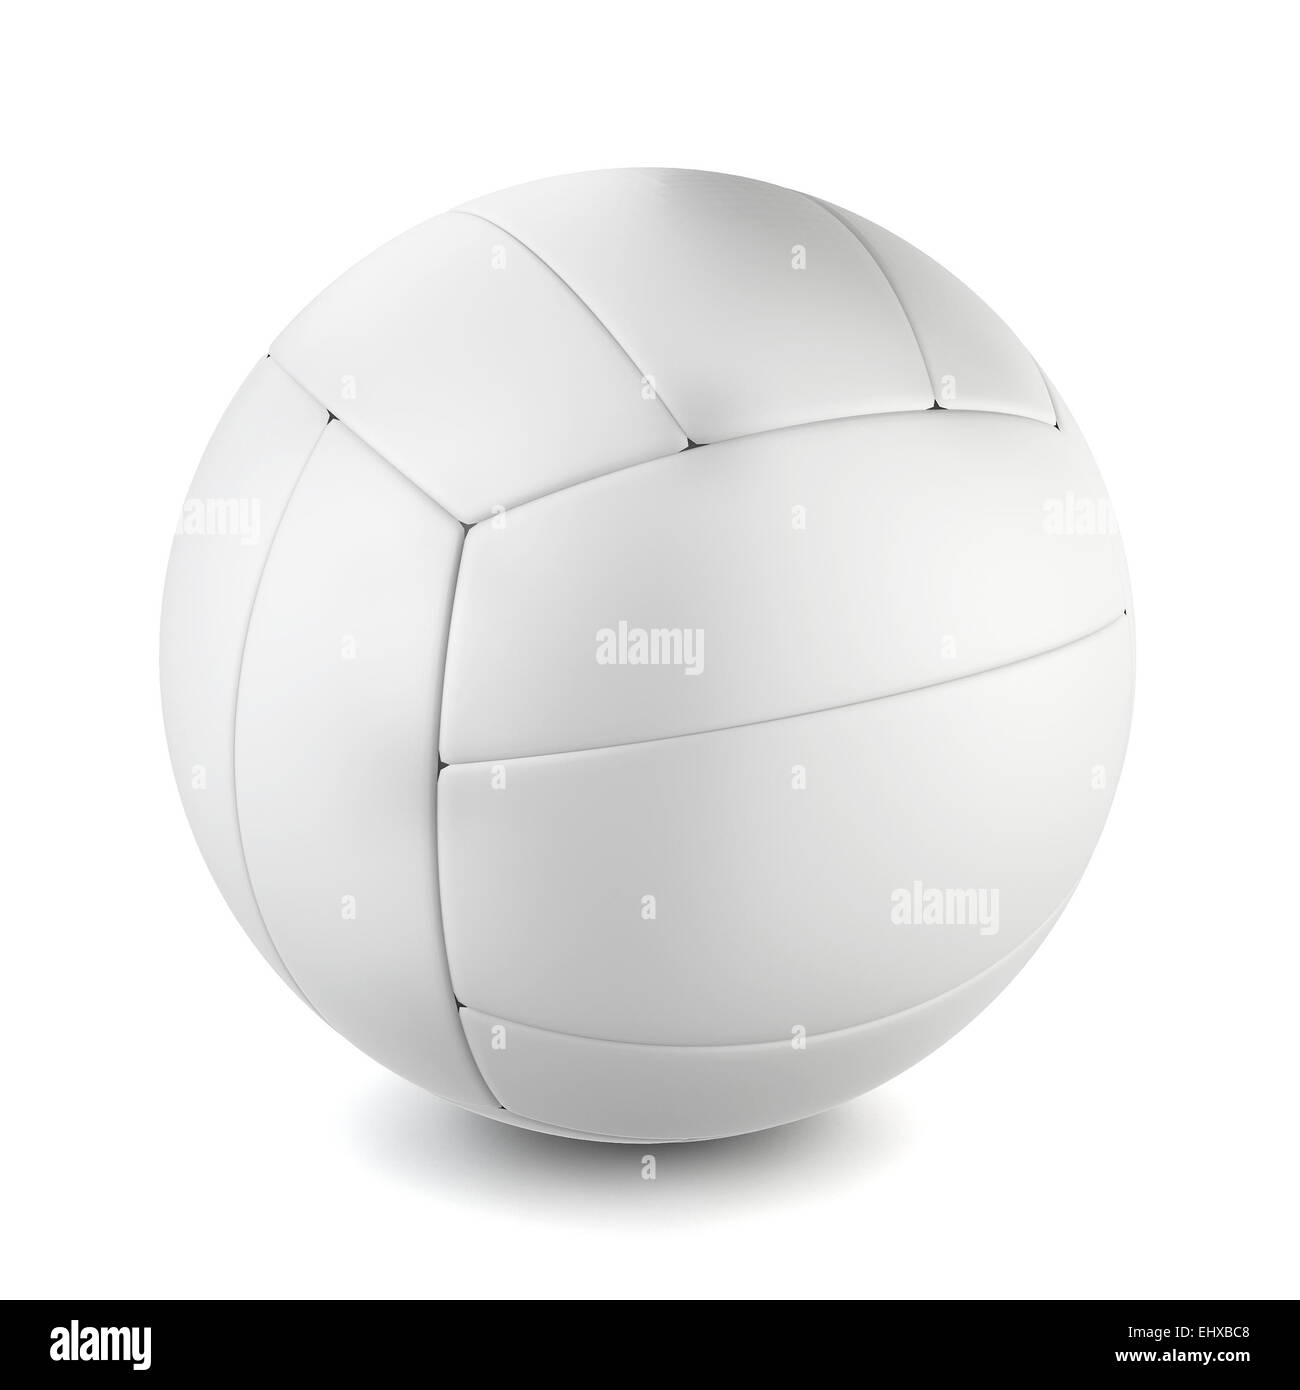 Volleyball' ball. 3d illustration on white background Stock Photo - Alamy